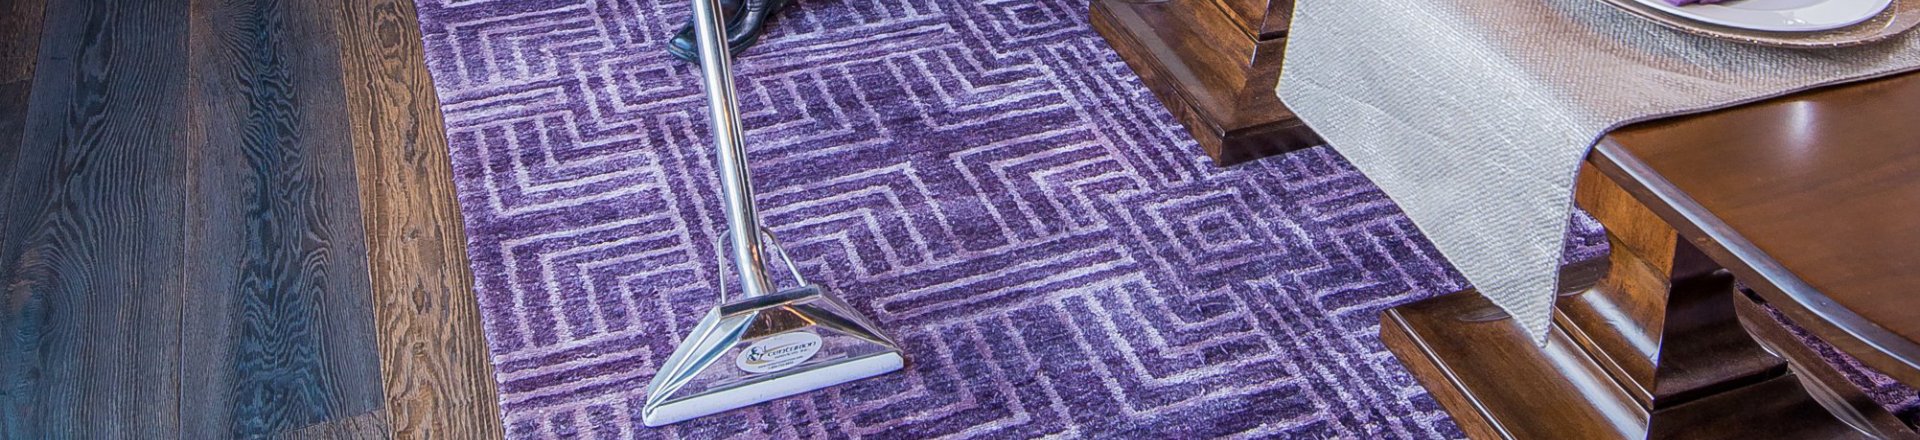 Rug Cleaning Services: Your Guide to a Spotless Home